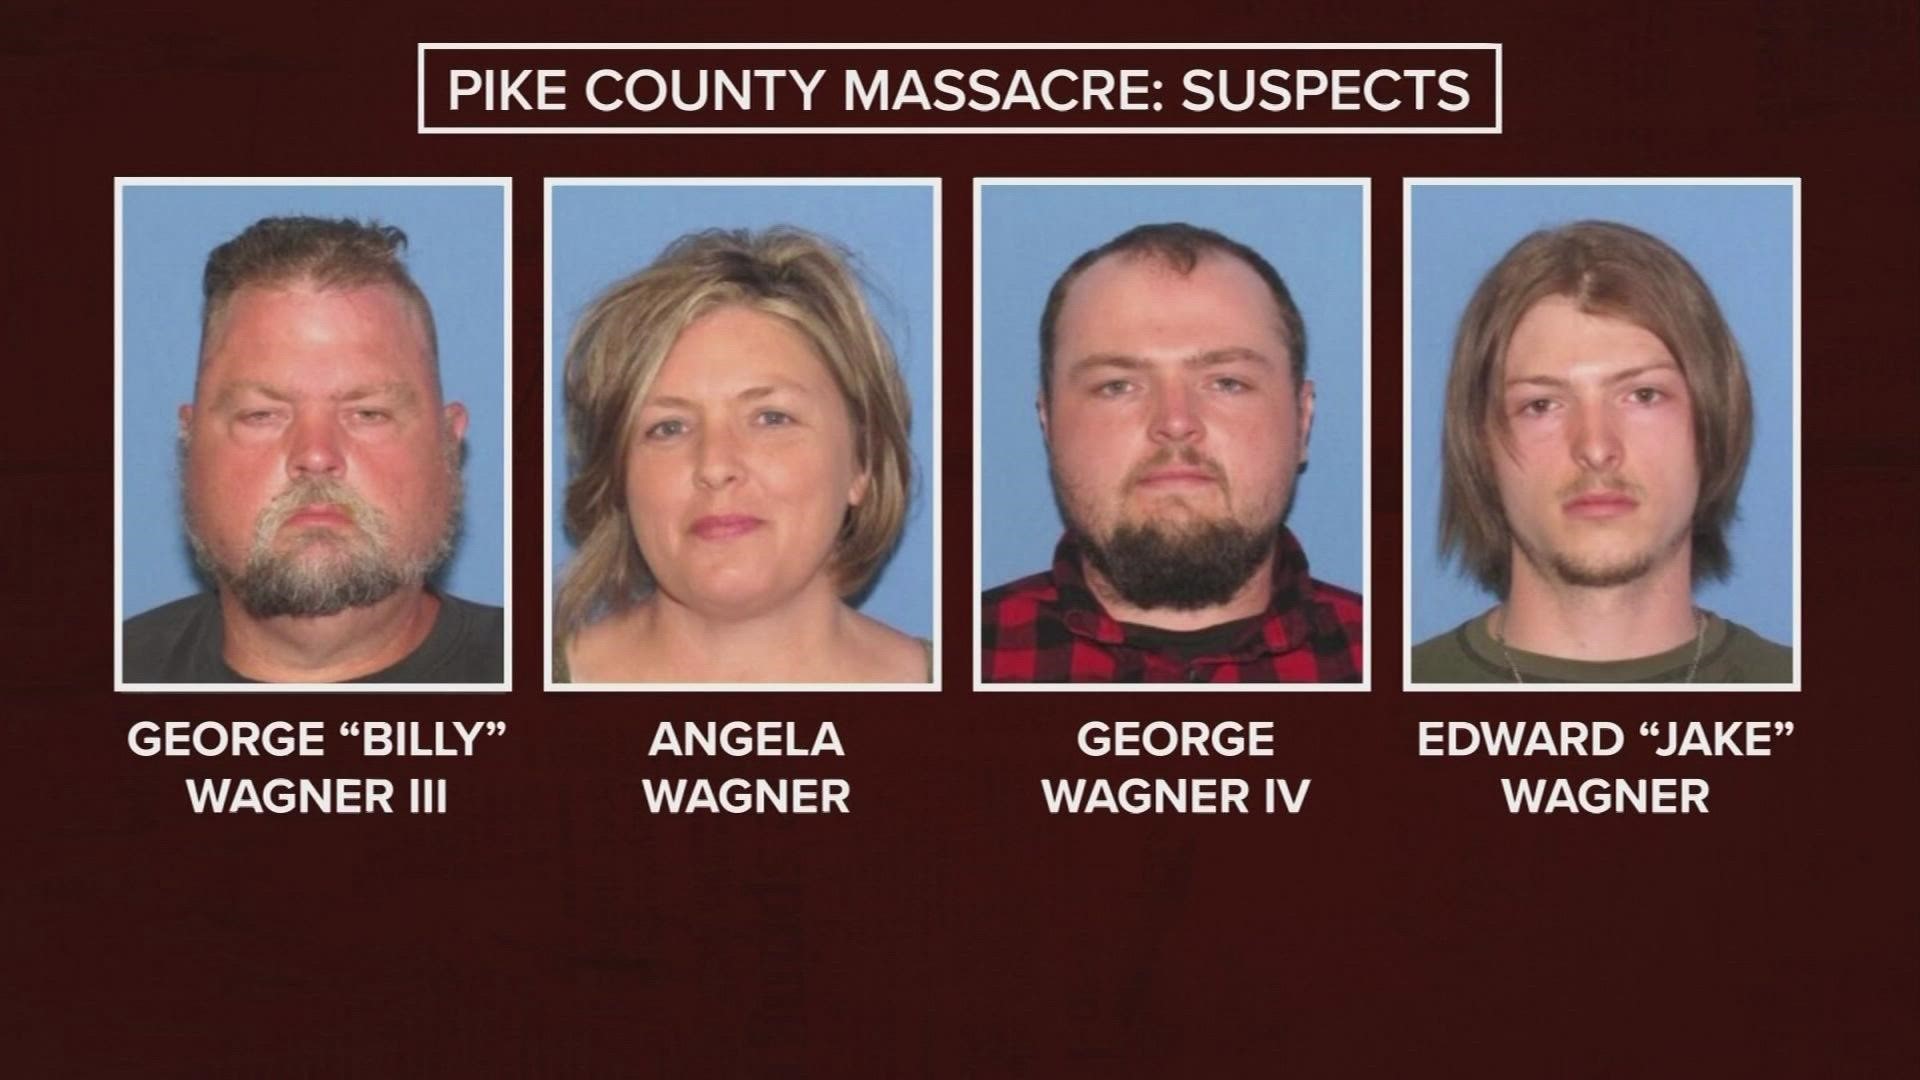 Defendant George Wagner IV was charged in Pike County Court in the 2016 slayings of the Rhoden family near Piketon.